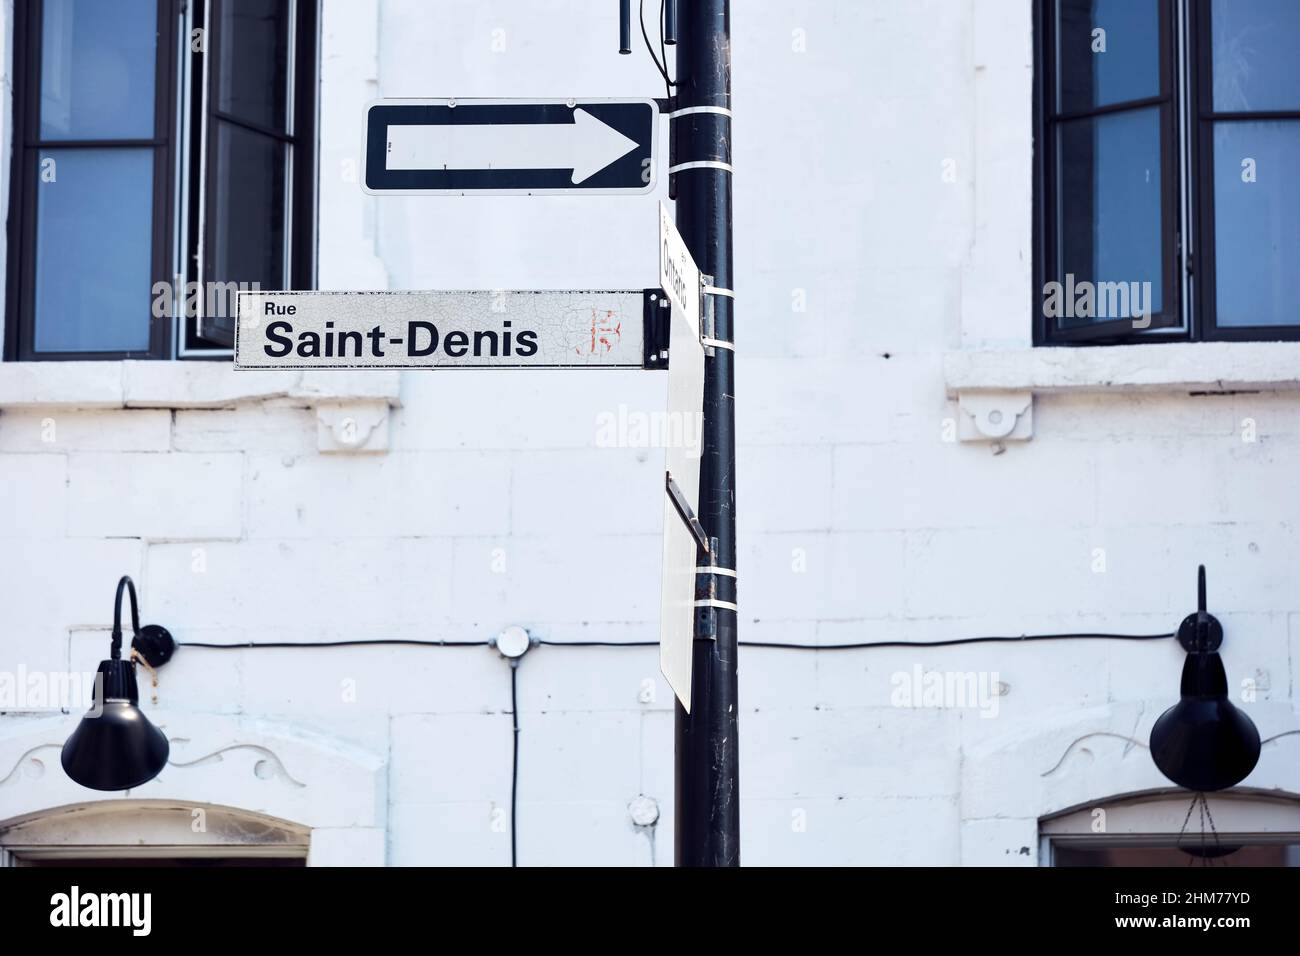 The sign post of rue Saint Denis street in Montreal Quebec Canada. Saint-denis street is a tourist attraction center known as the heart of Montreal. Stock Photo